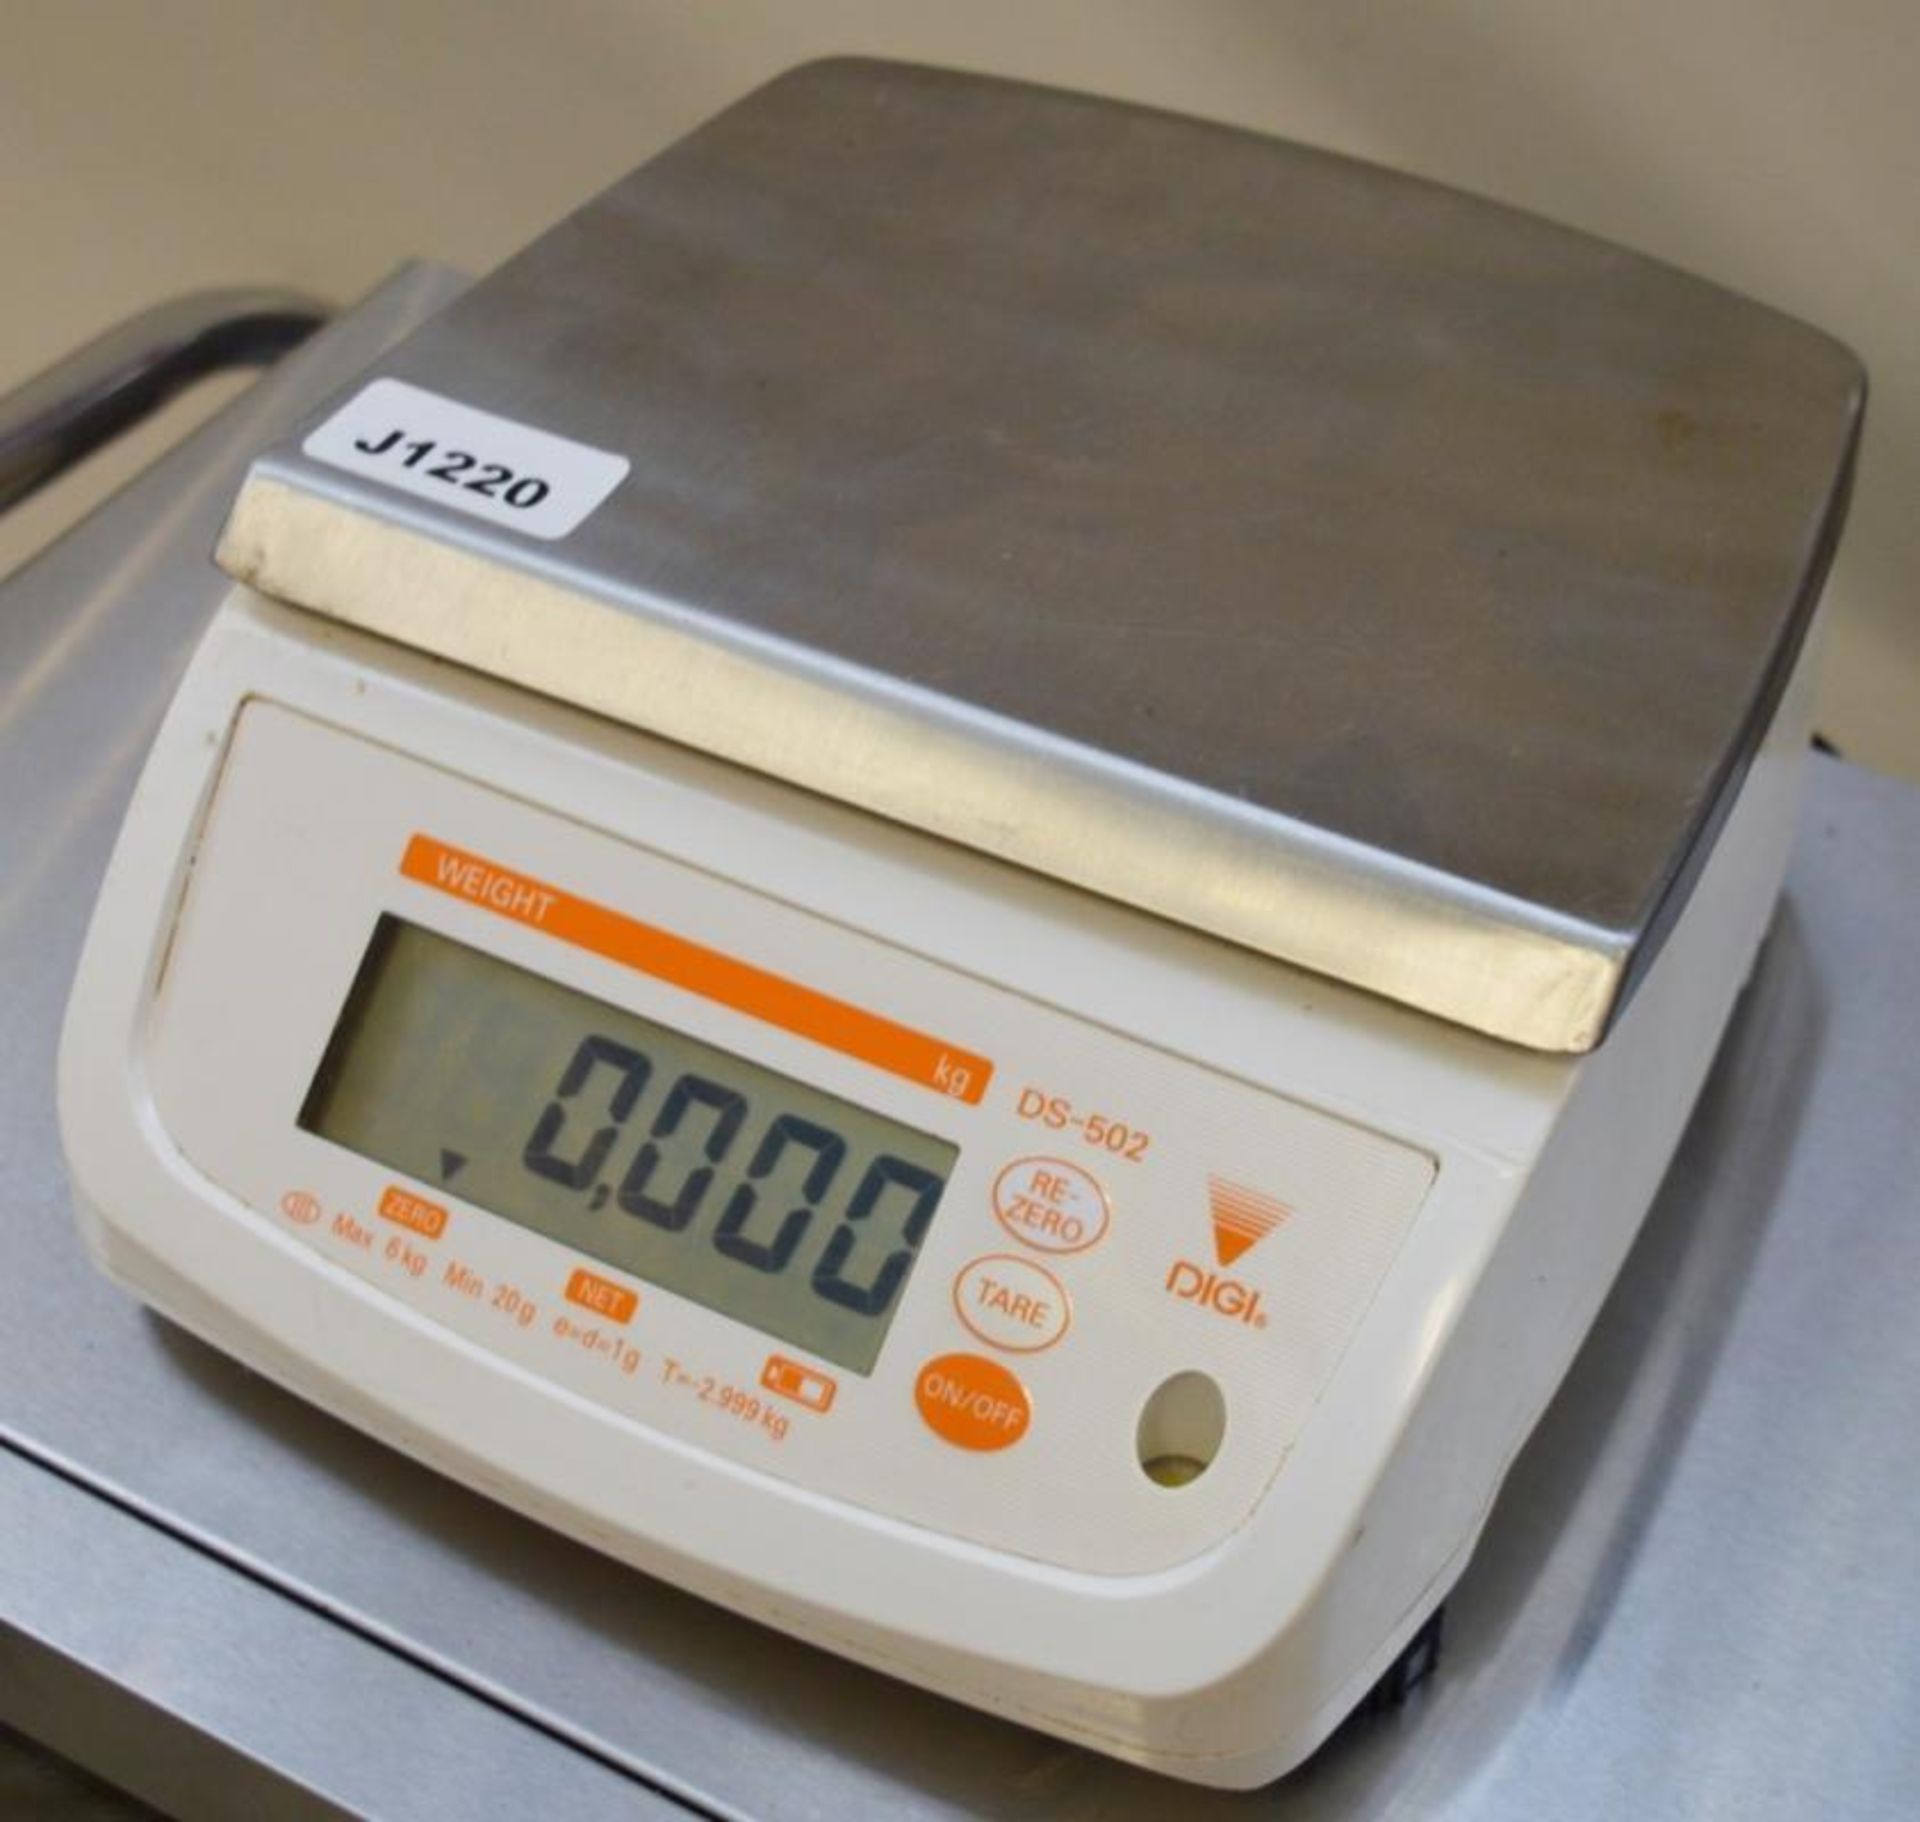 1 x Marsden Digi DS-502 Wipe Down Bench Scales With AC Adaptor - CL282 - Ref J1220 - Location: Altri - Image 2 of 3